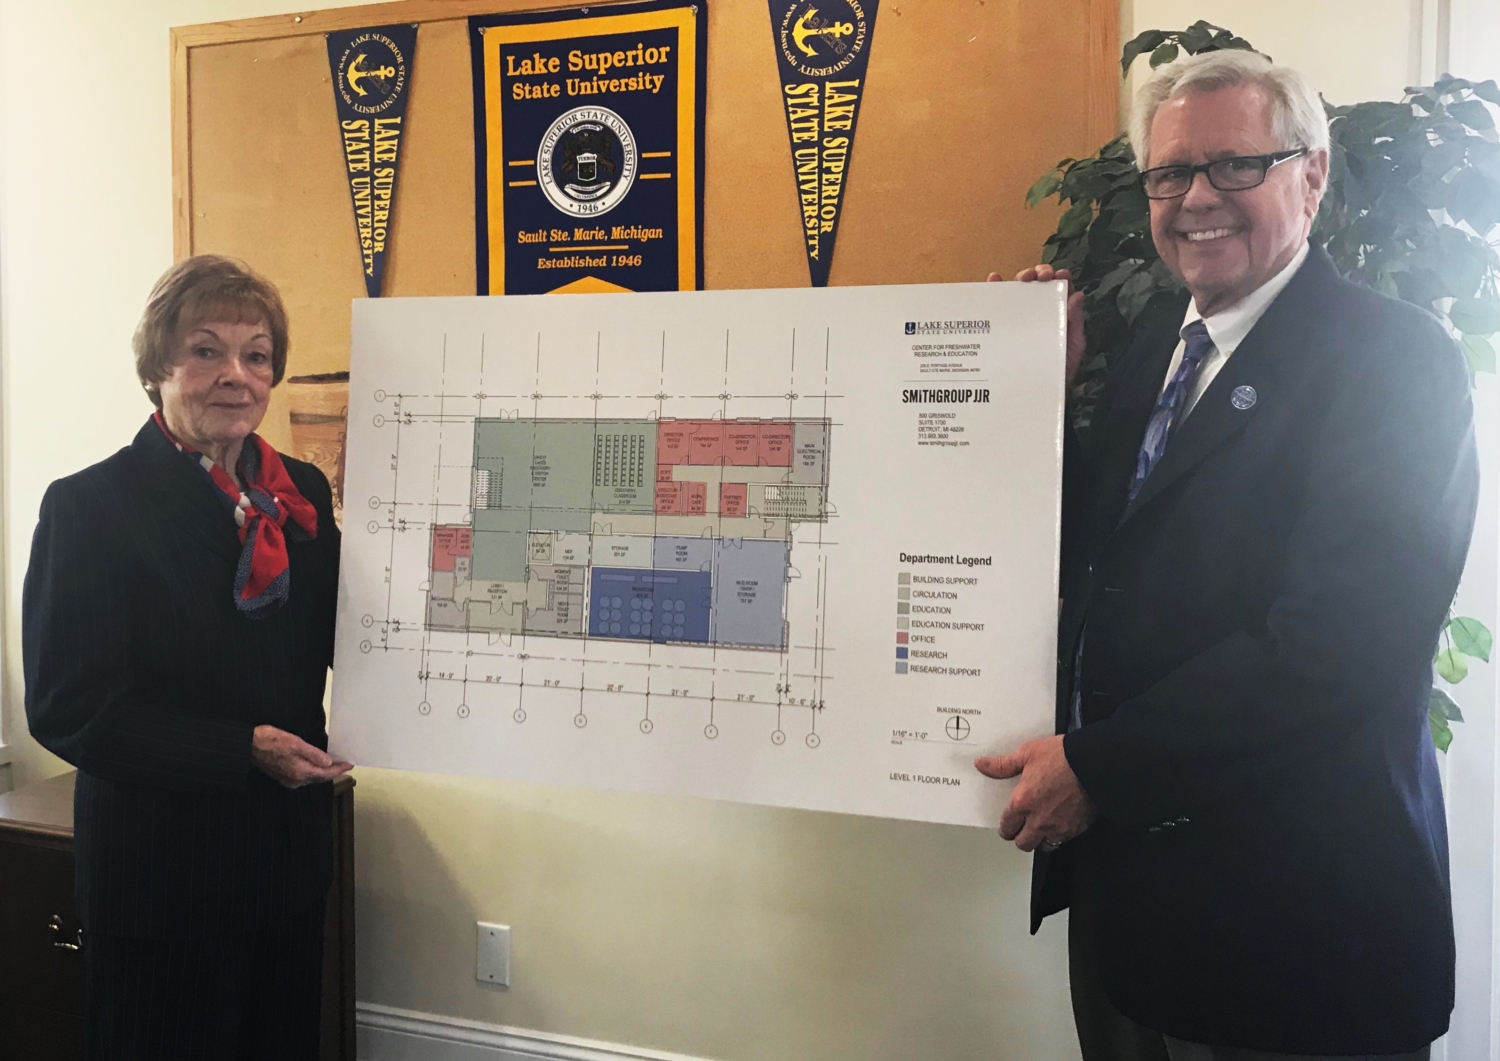 Drs. Connie Baker and Peter Mitchell posing with conceptual floor plan of the Center for Freshwater Research and Education